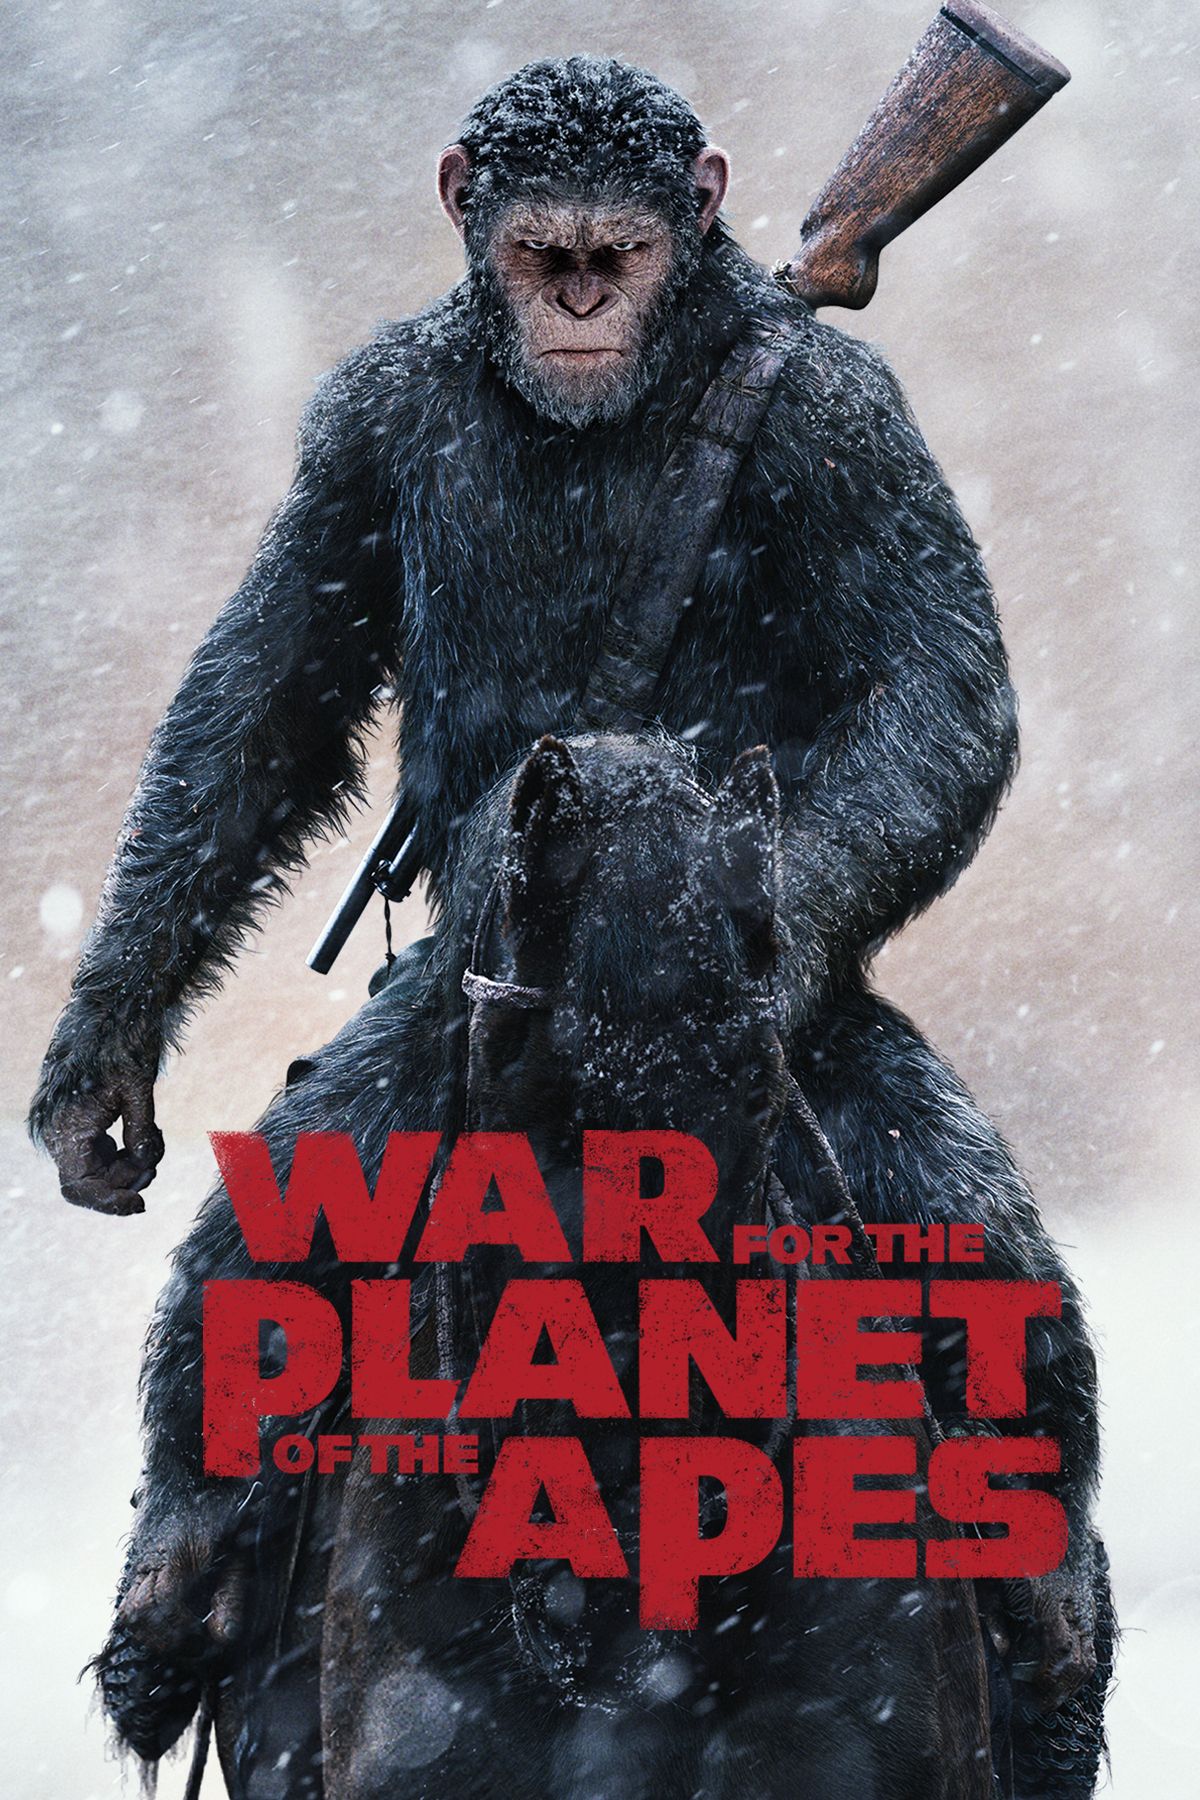 War for planet of the apes online free